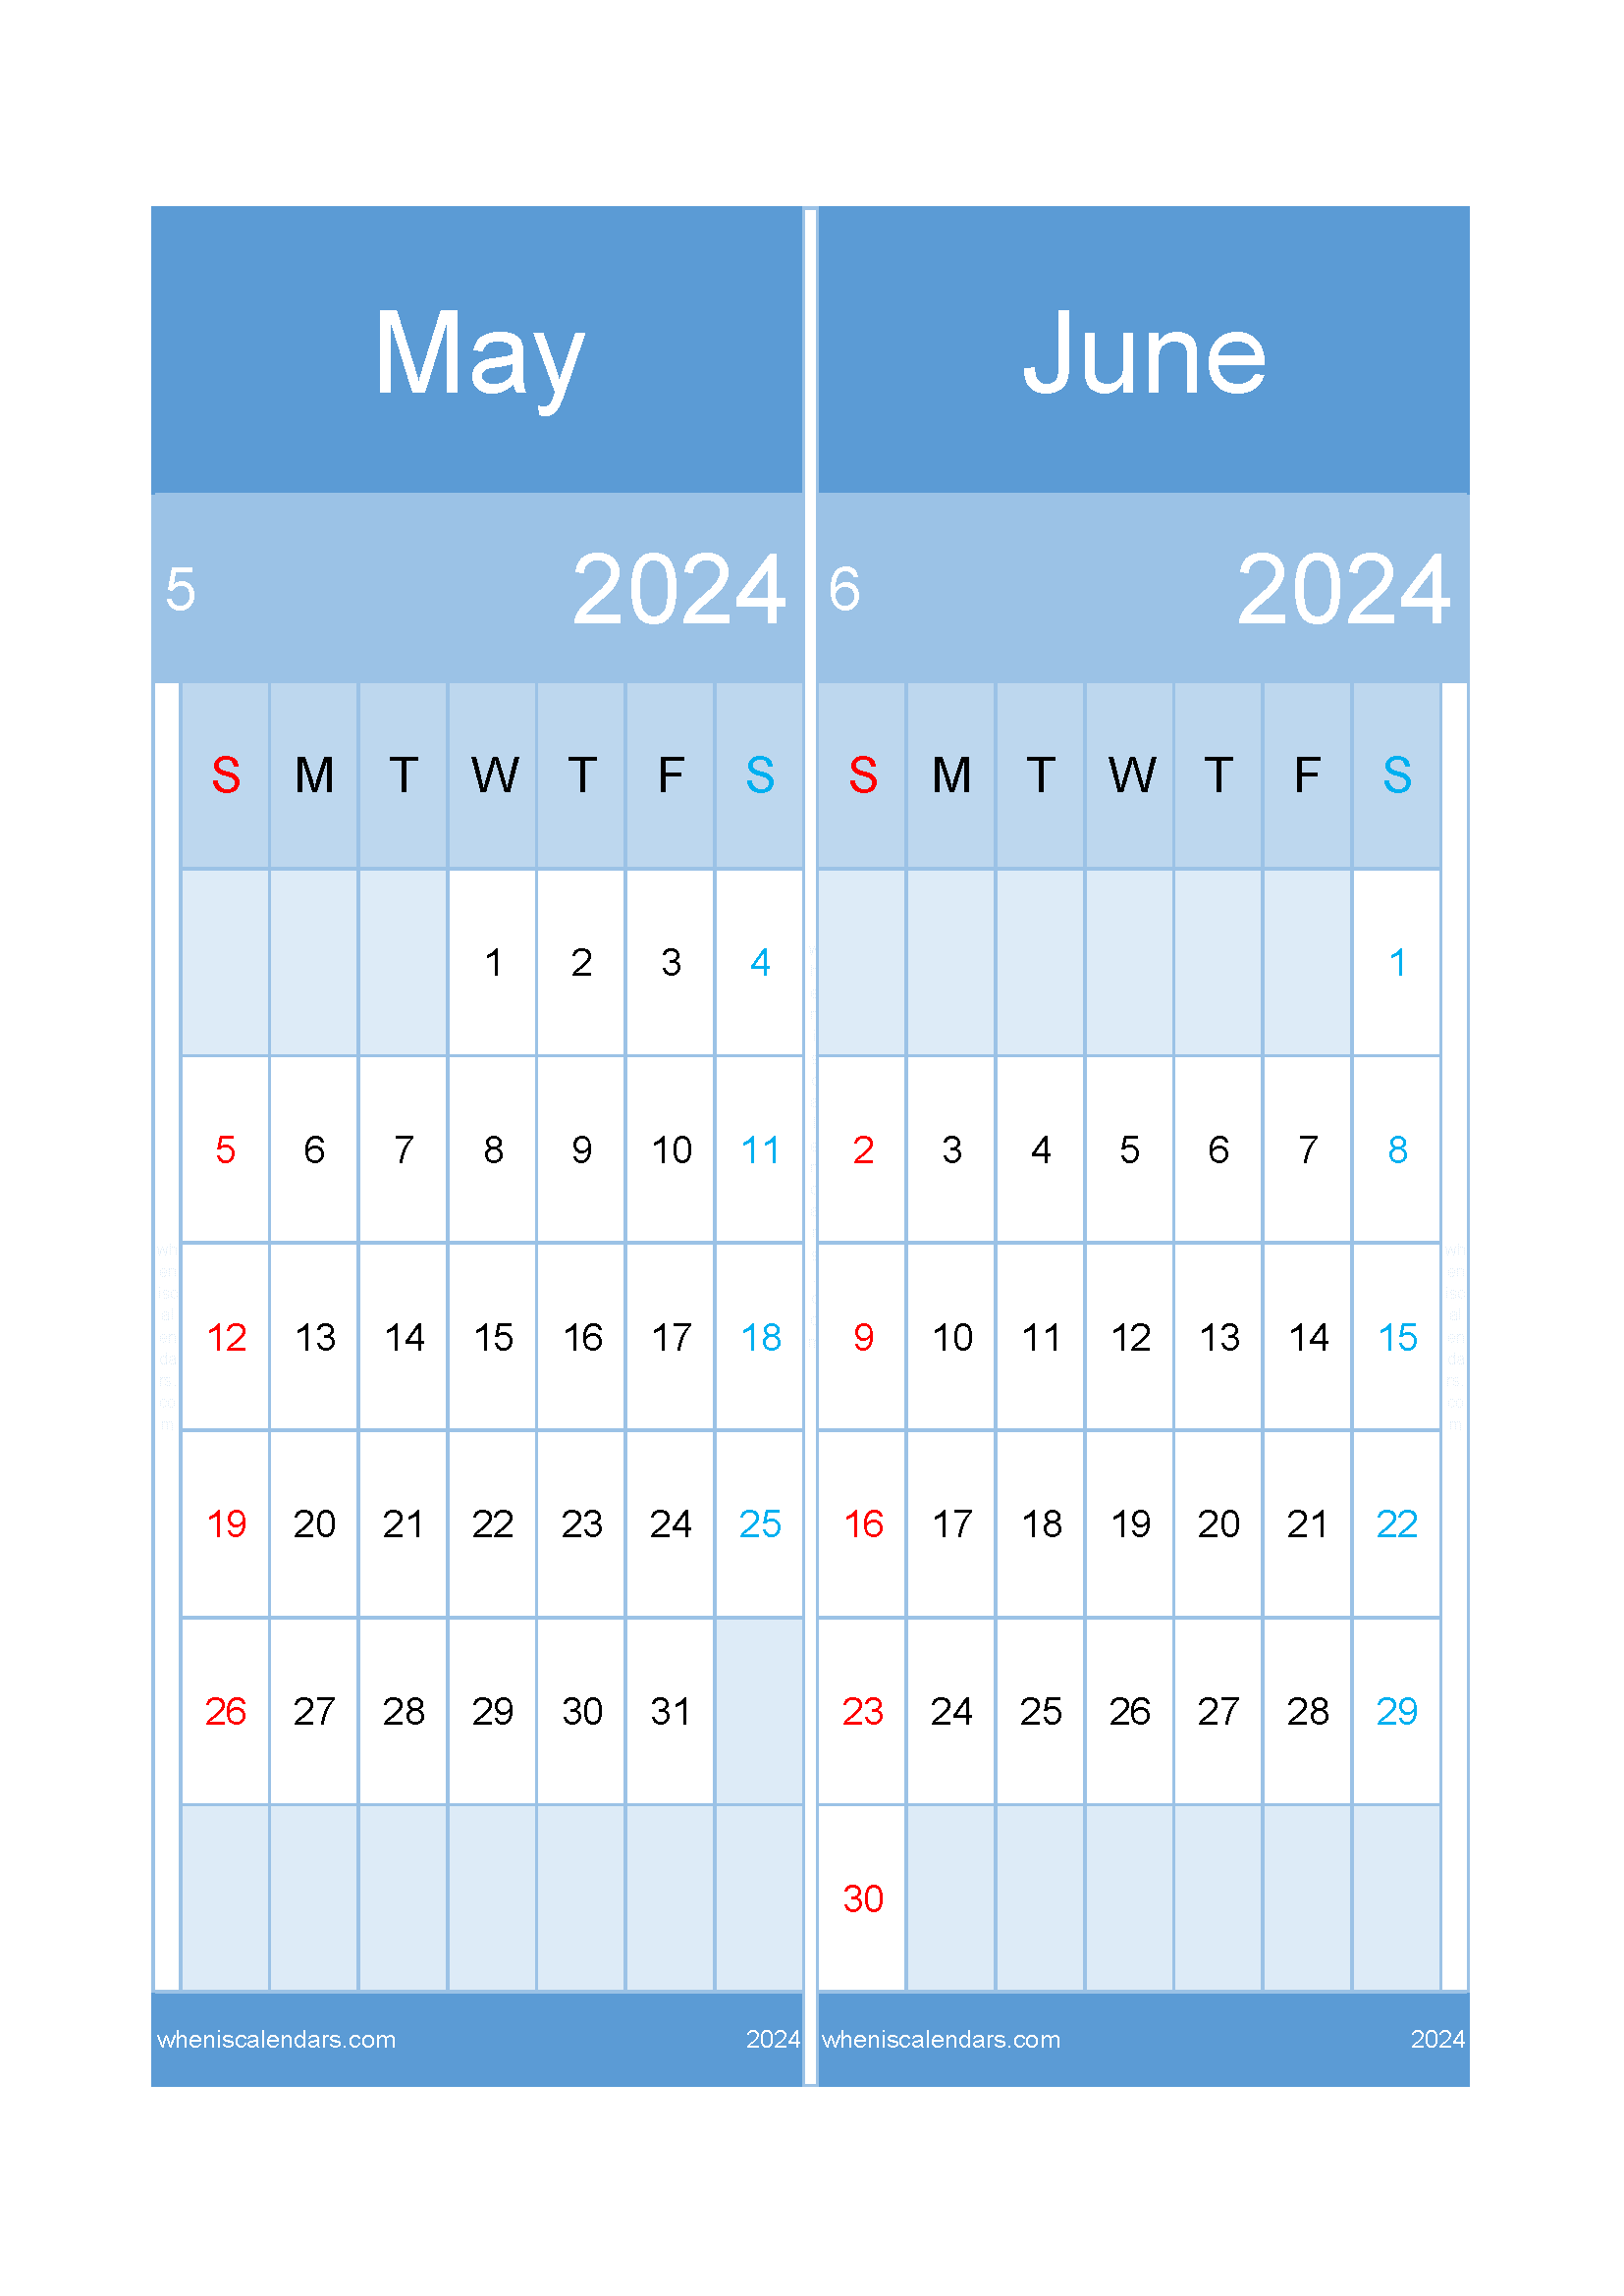 Download May to June 2024 calendar A4 MJ242024